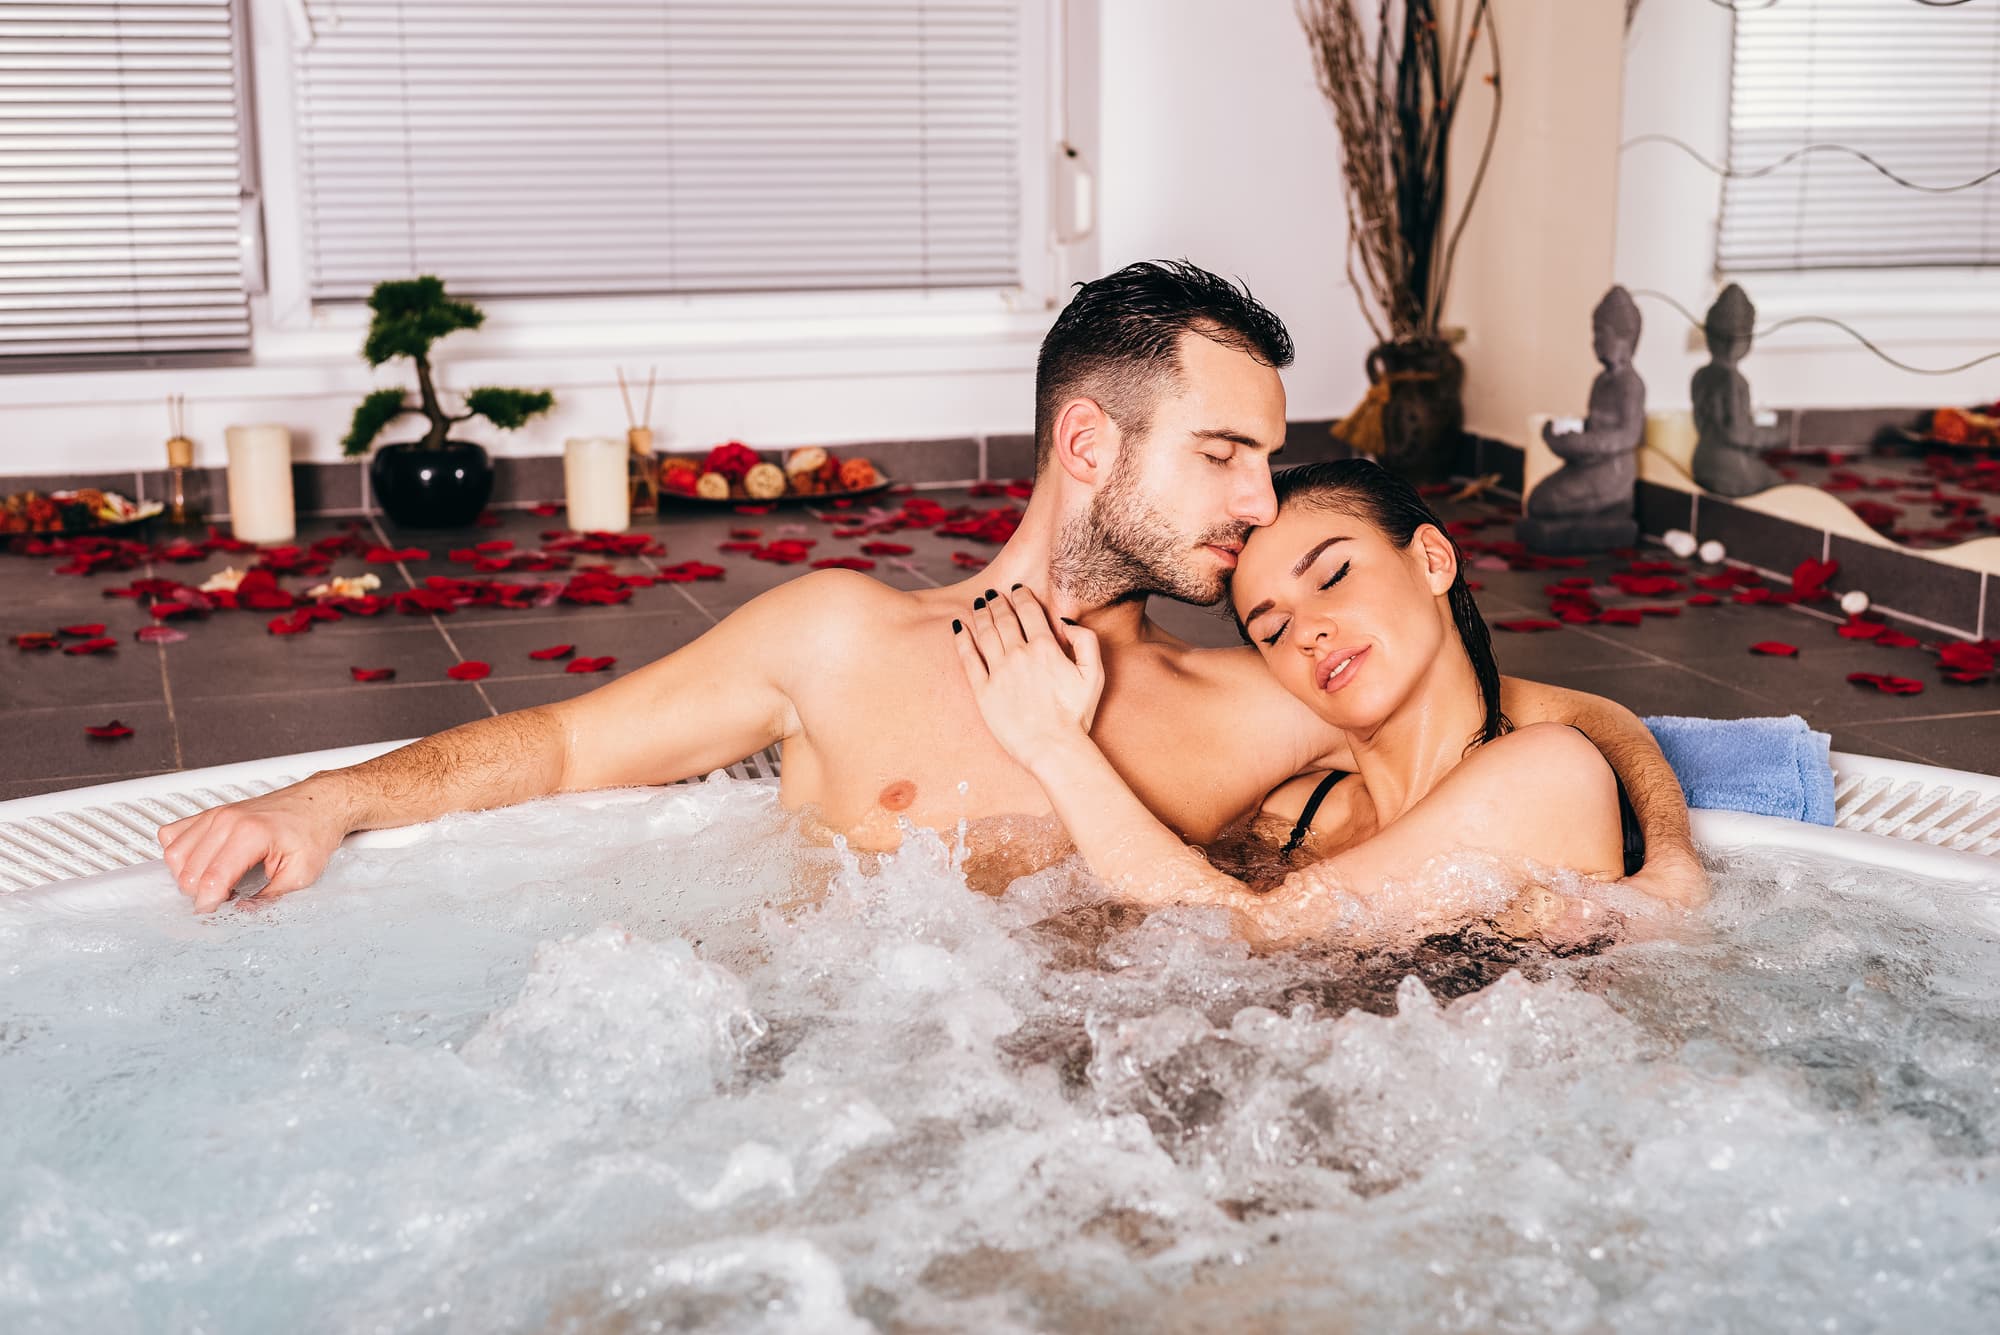 Why You Should Never Use A Bath Bomb In A Jacuzzi Tub